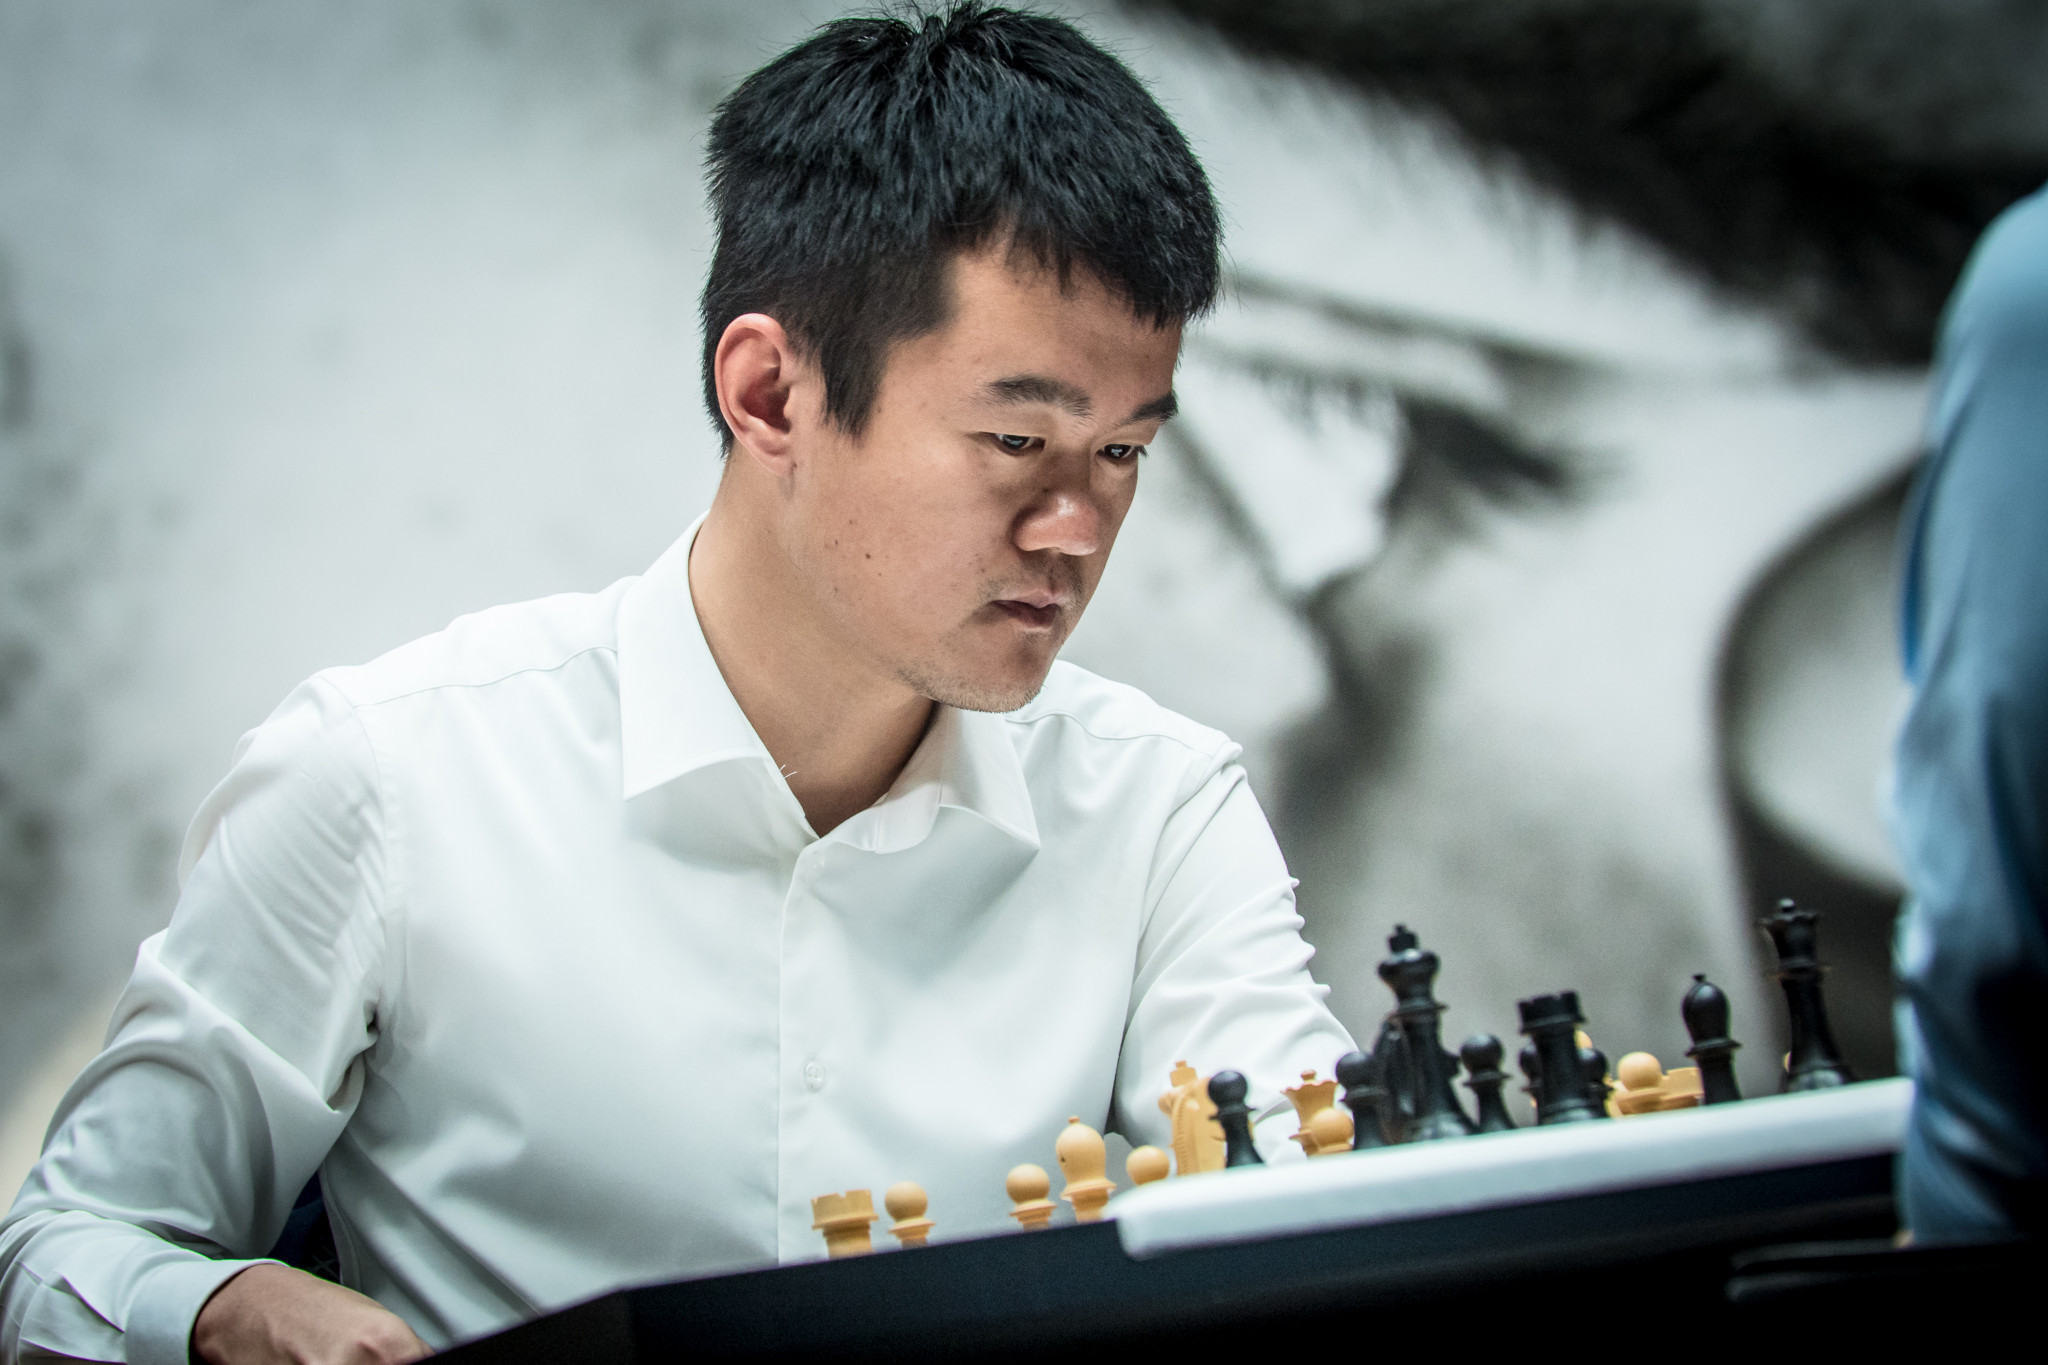 World chess champion Ding Liren will play for China in the home Asian Games in Hangzhou this year ©FIDE